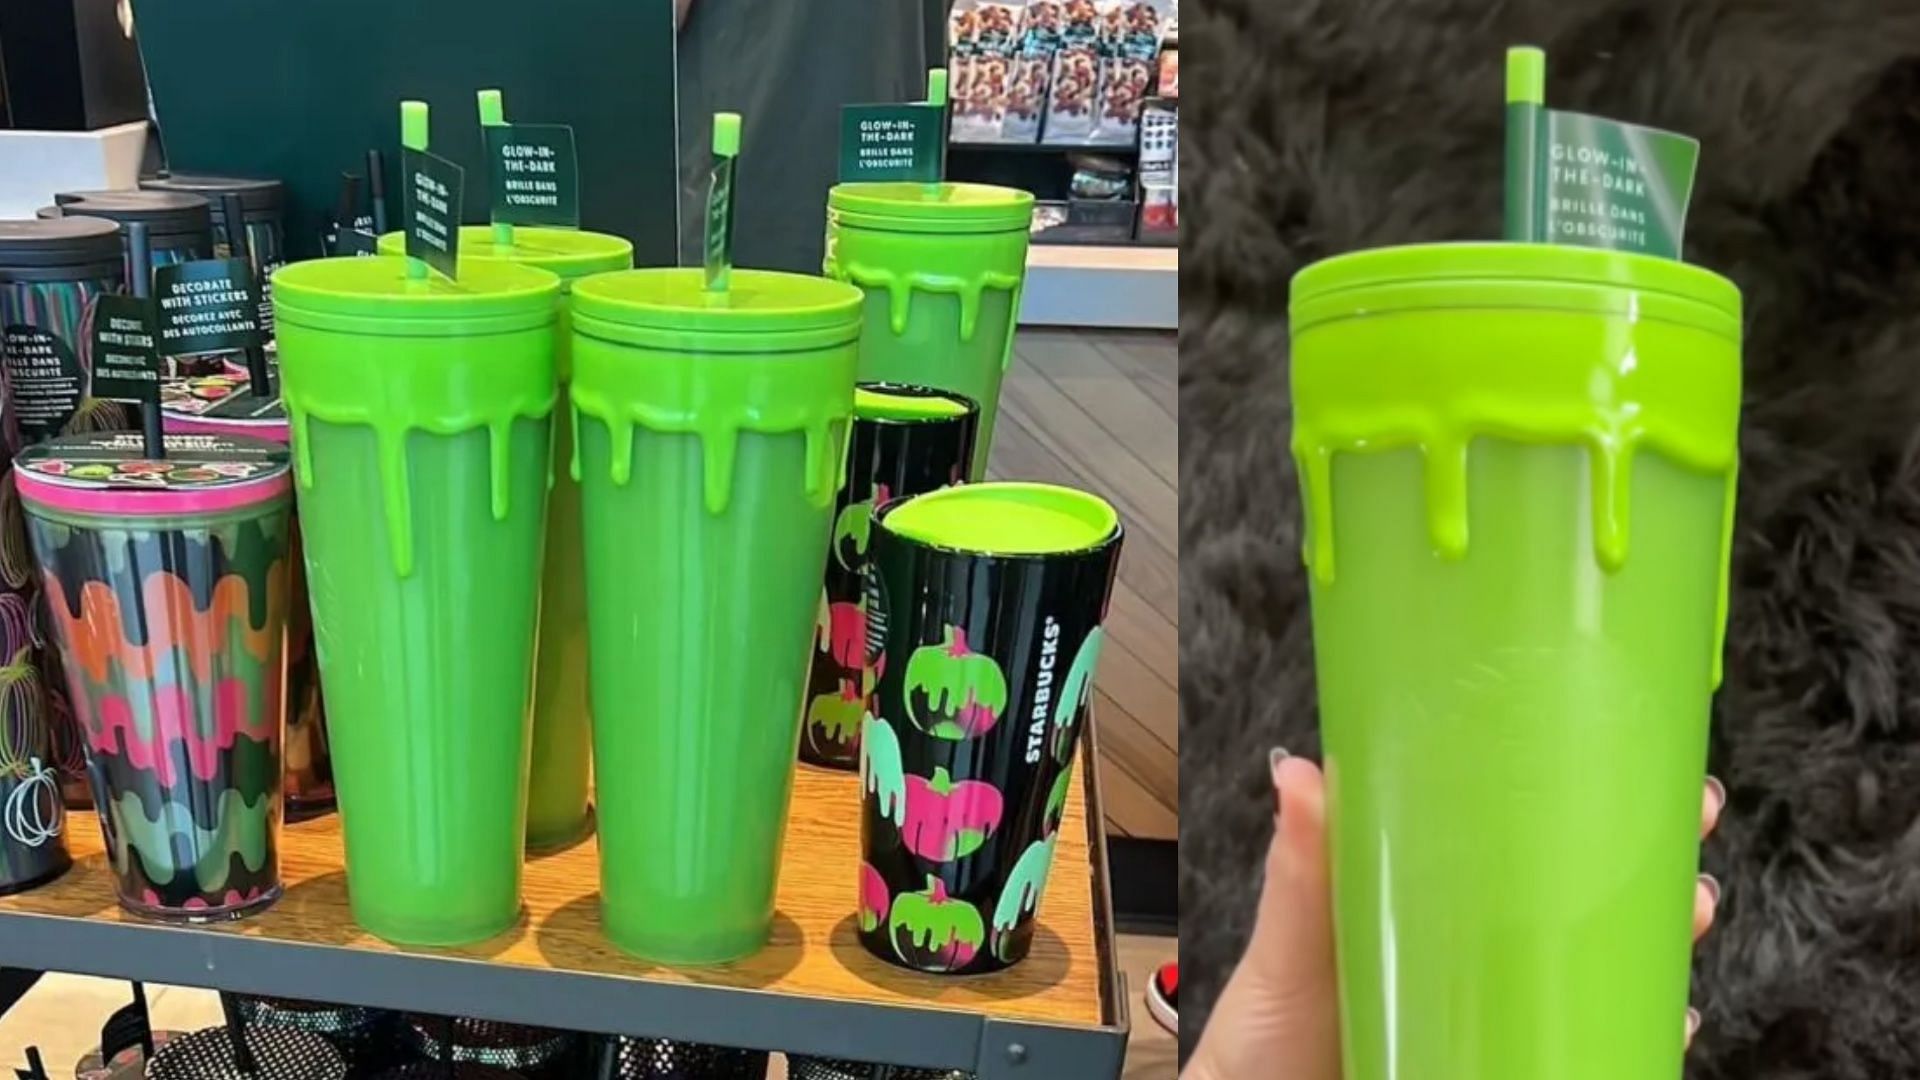 Starbucks to release a slime-dripping tumbler this Halloween